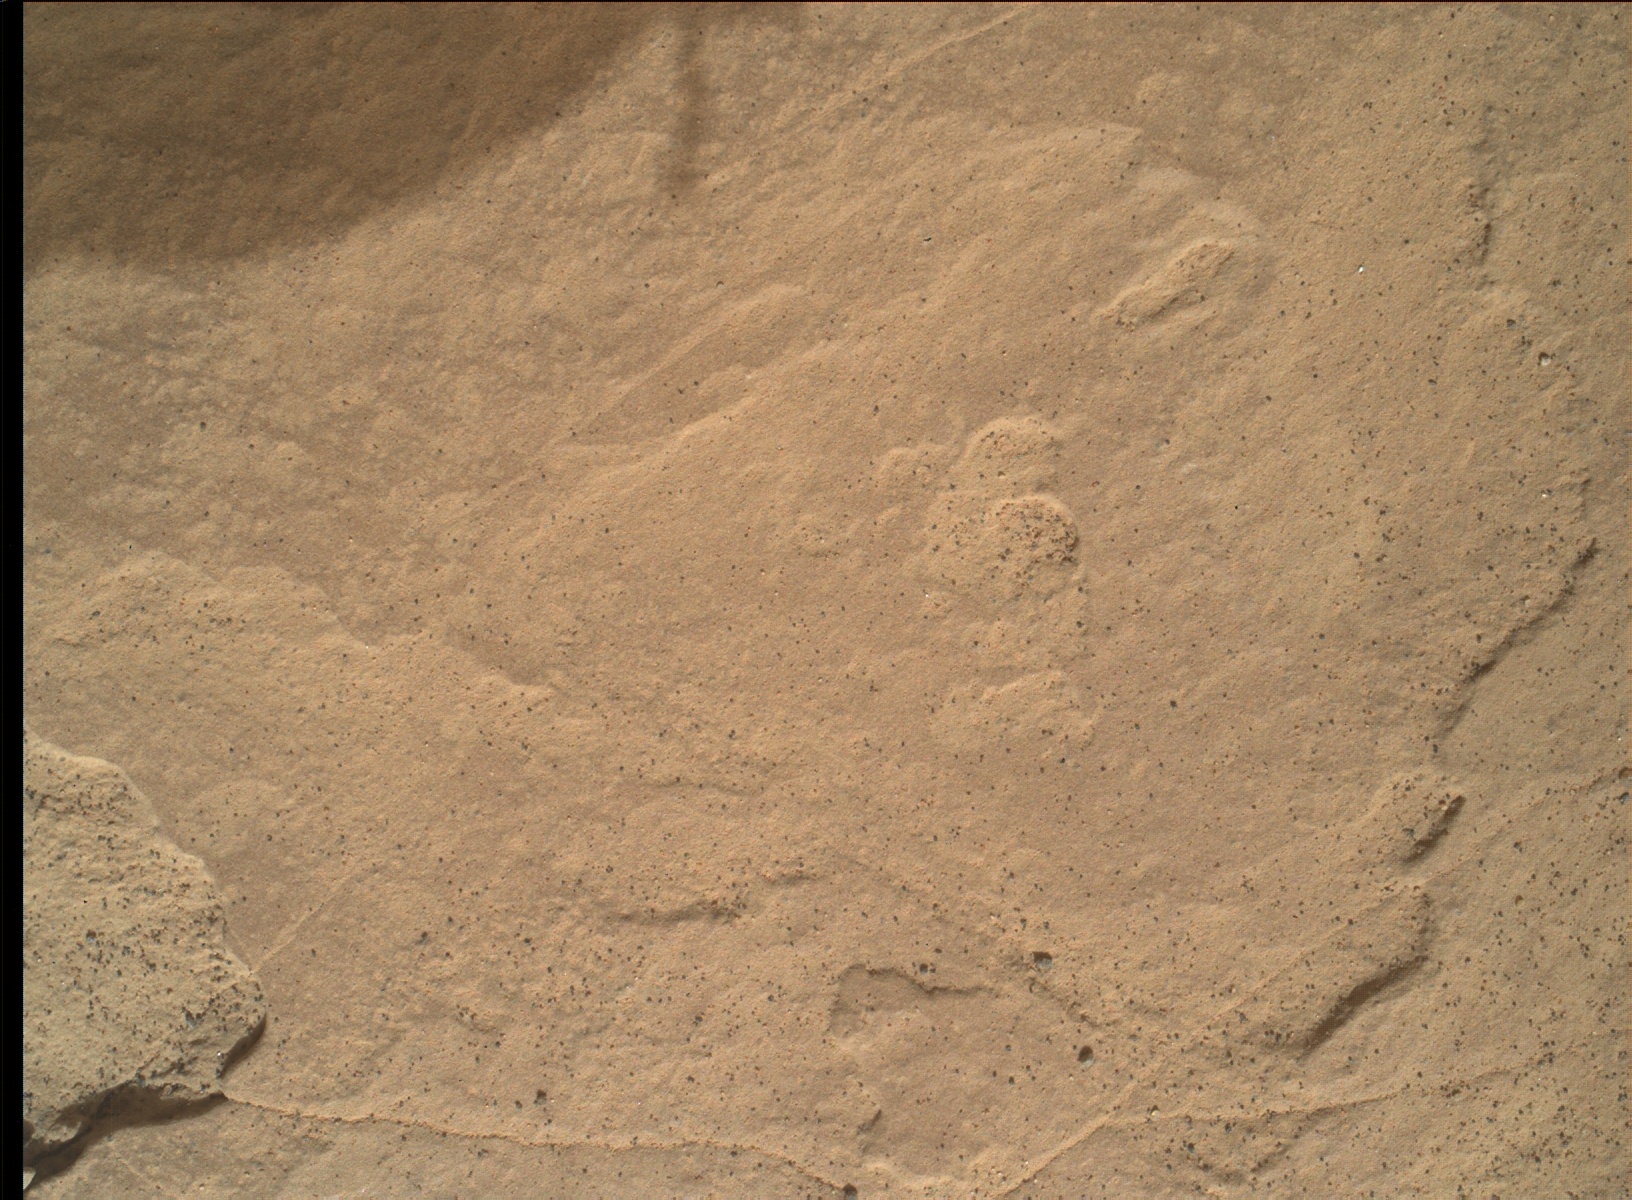 Nasa's Mars rover Curiosity acquired this image using its Mars Hand Lens Imager (MAHLI) on Sol 1692